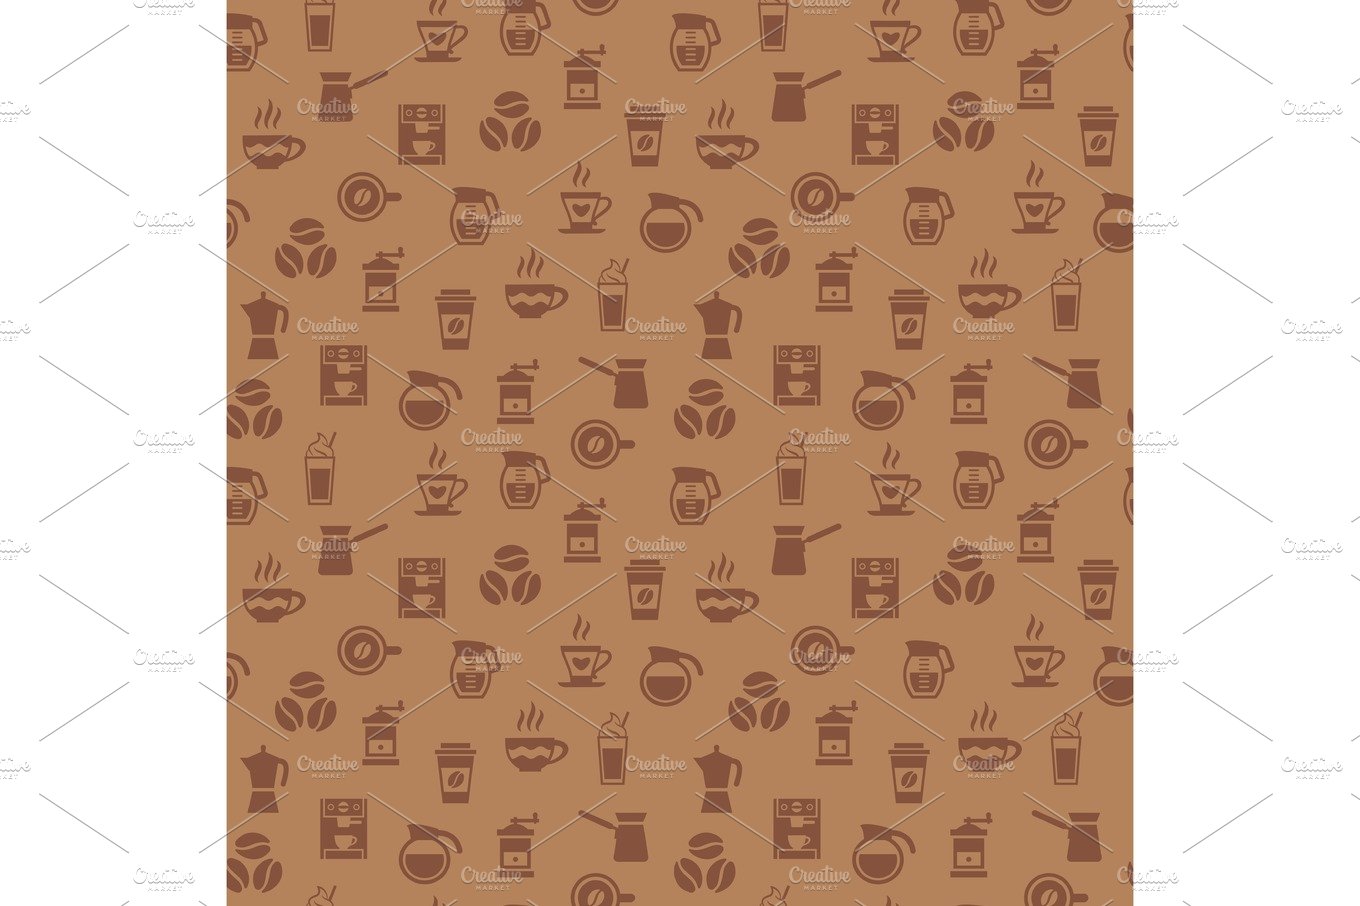 Coffee seamless pattern. Background with icons. cover image.